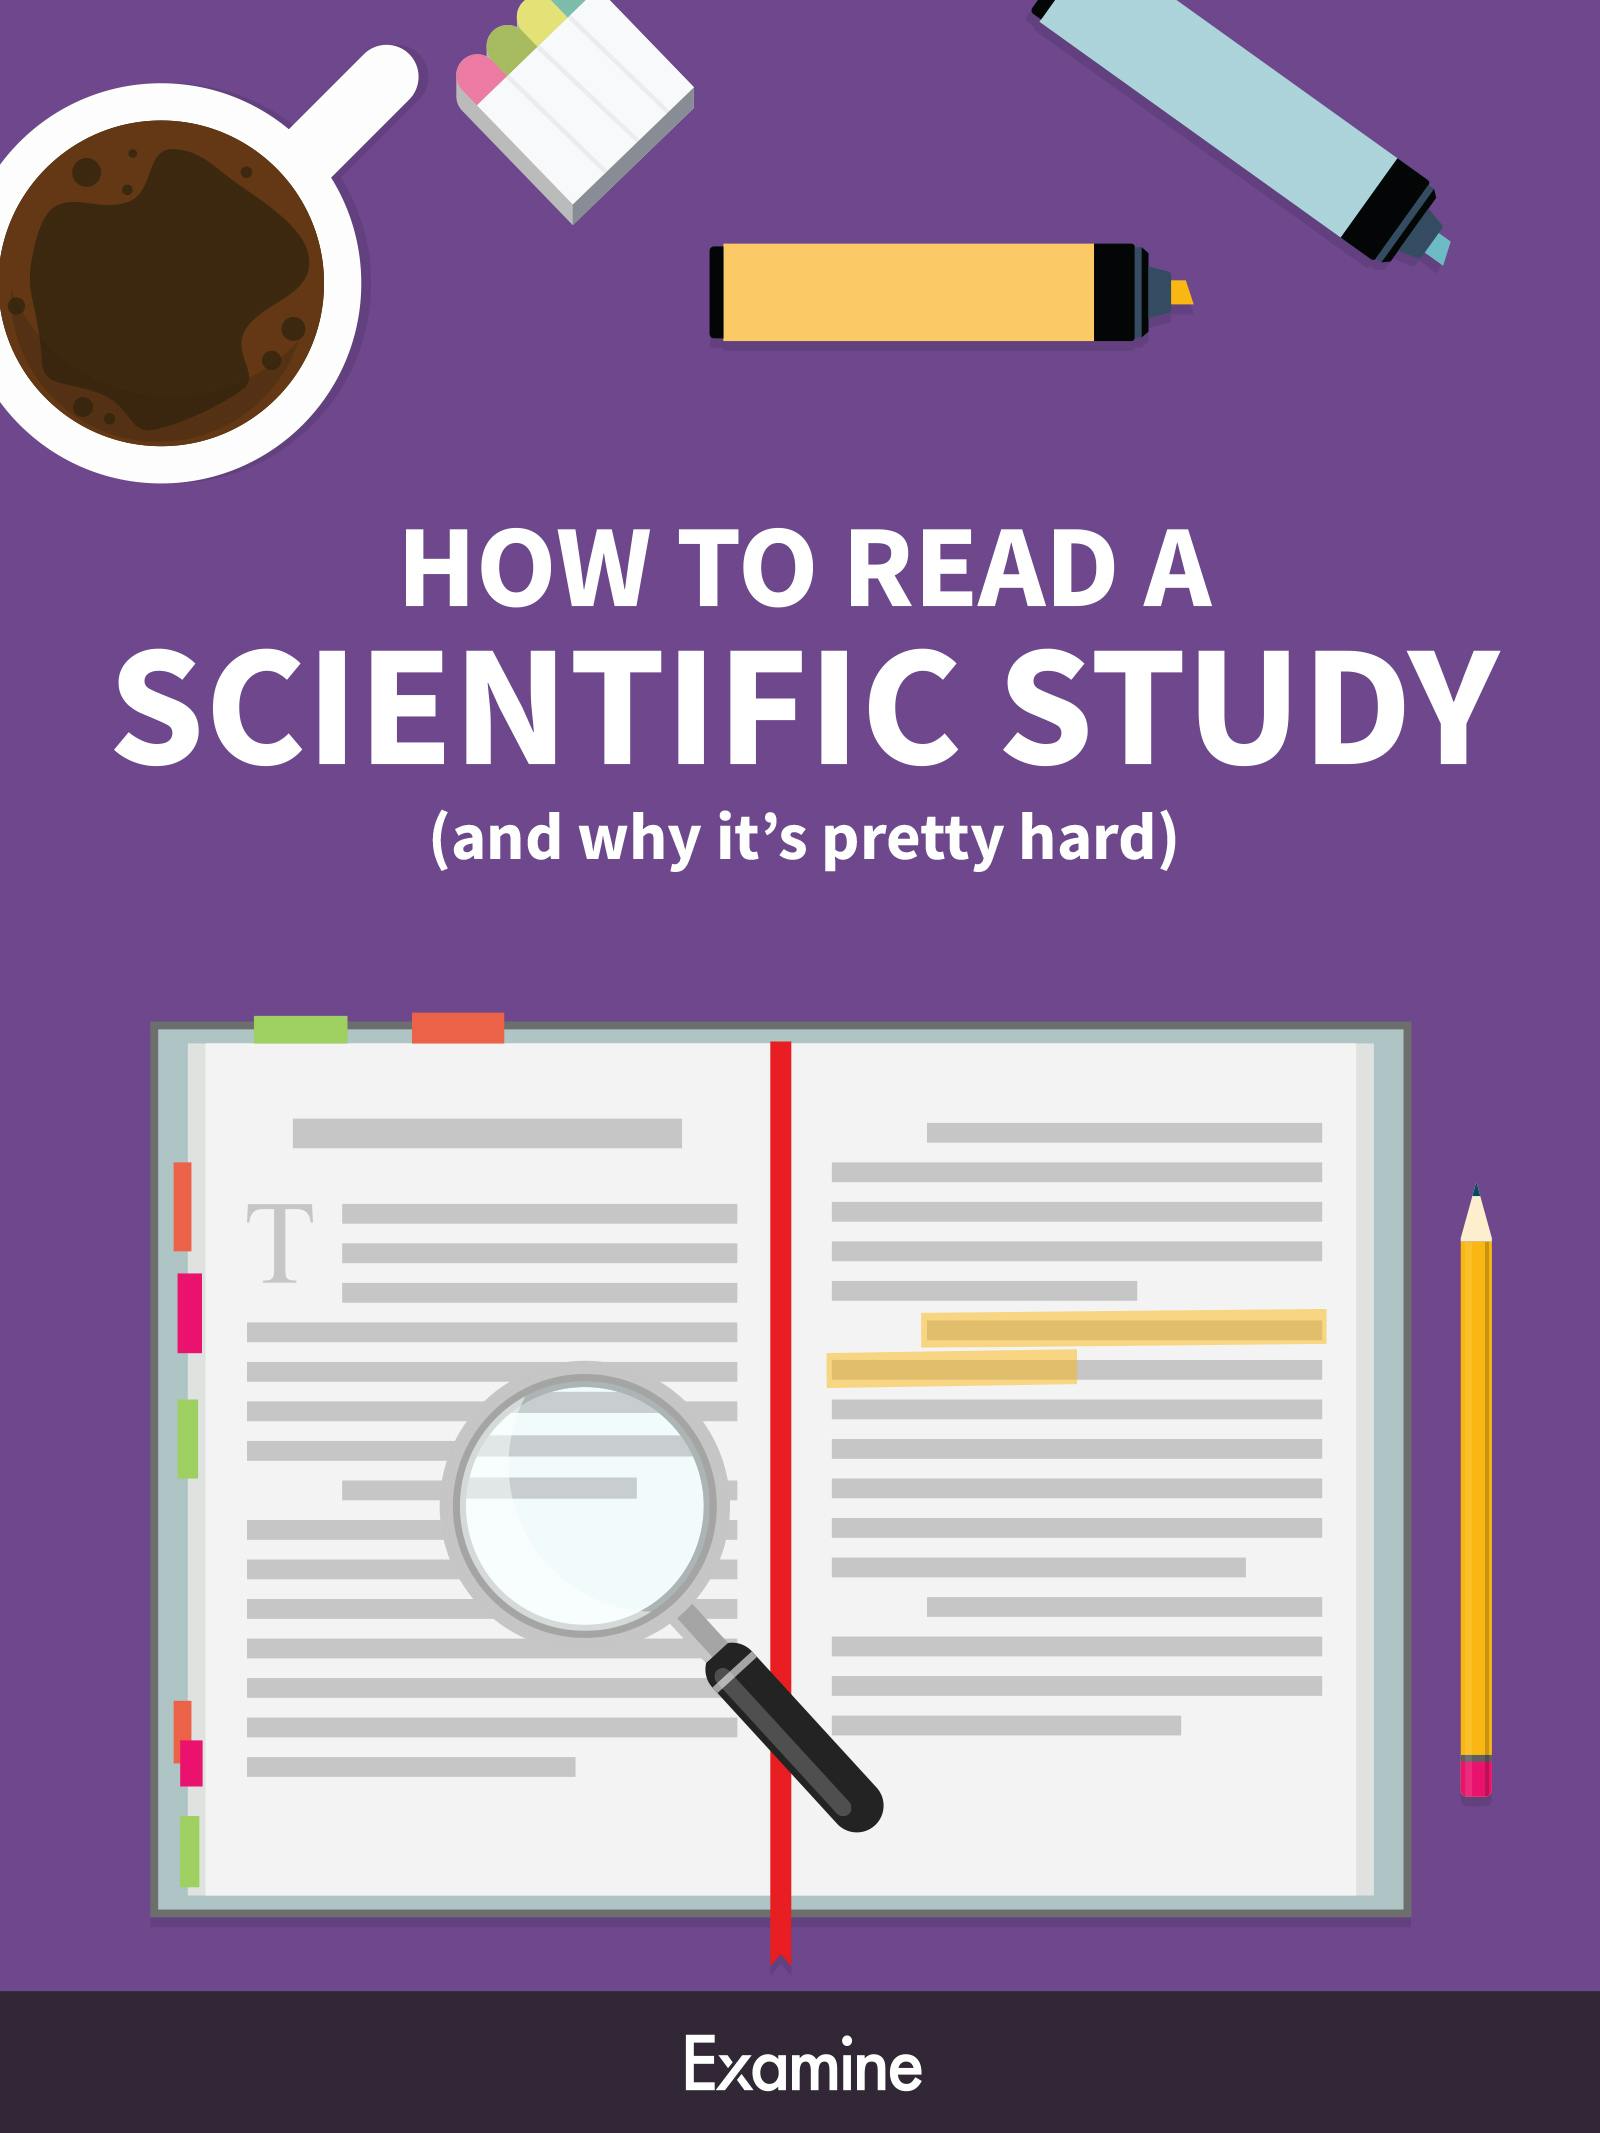 How to read a scientific study